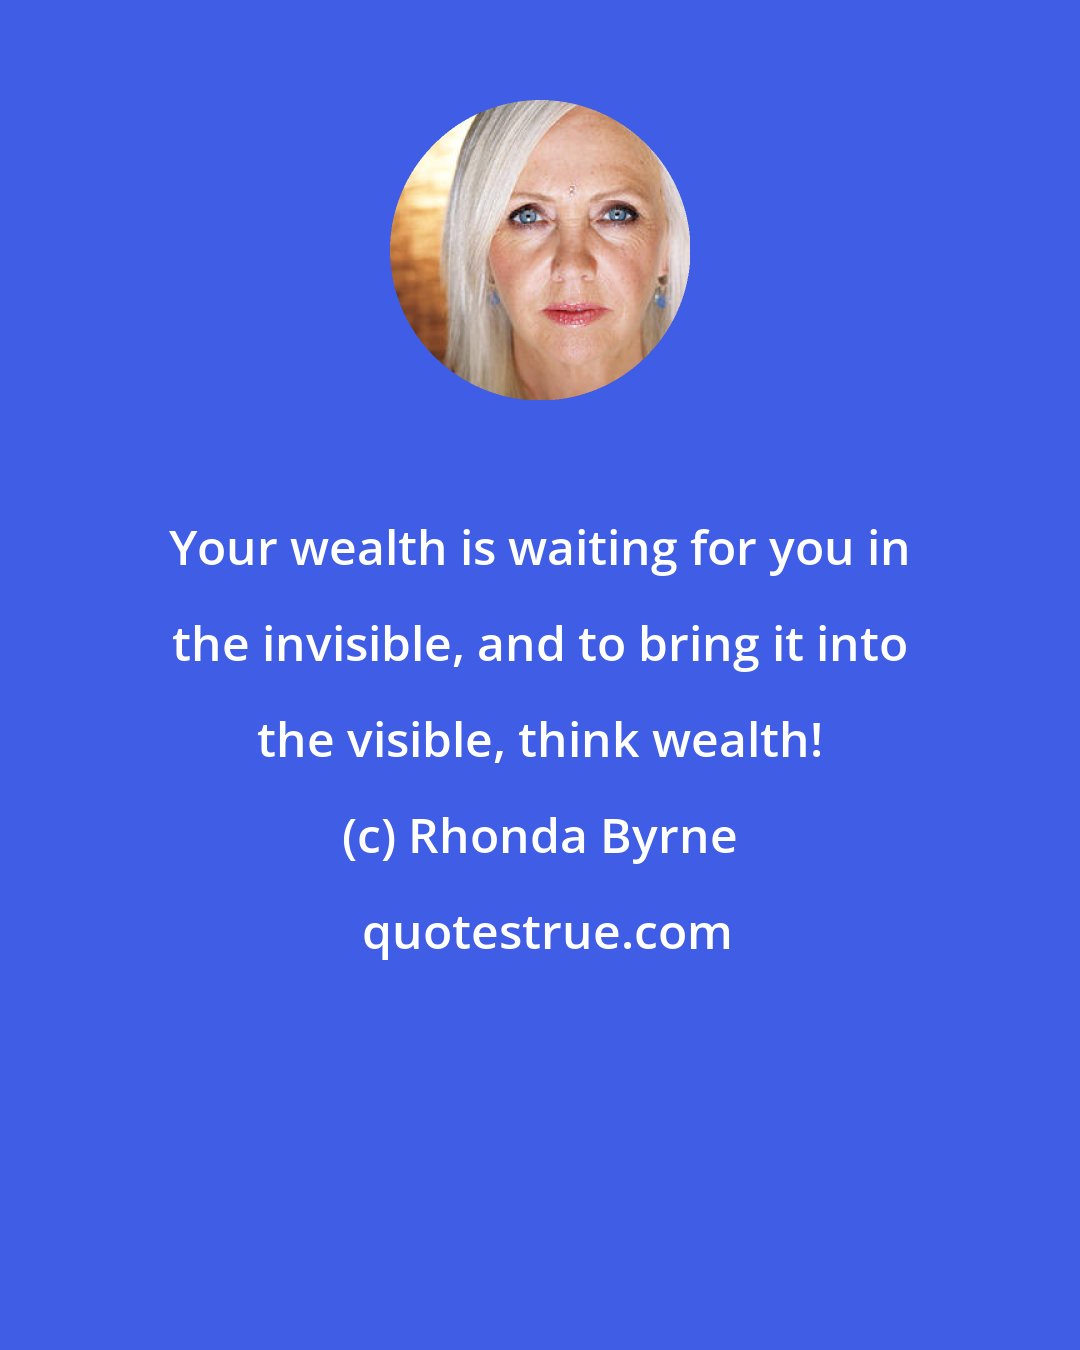 Rhonda Byrne: Your wealth is waiting for you in the invisible, and to bring it into the visible, think wealth!